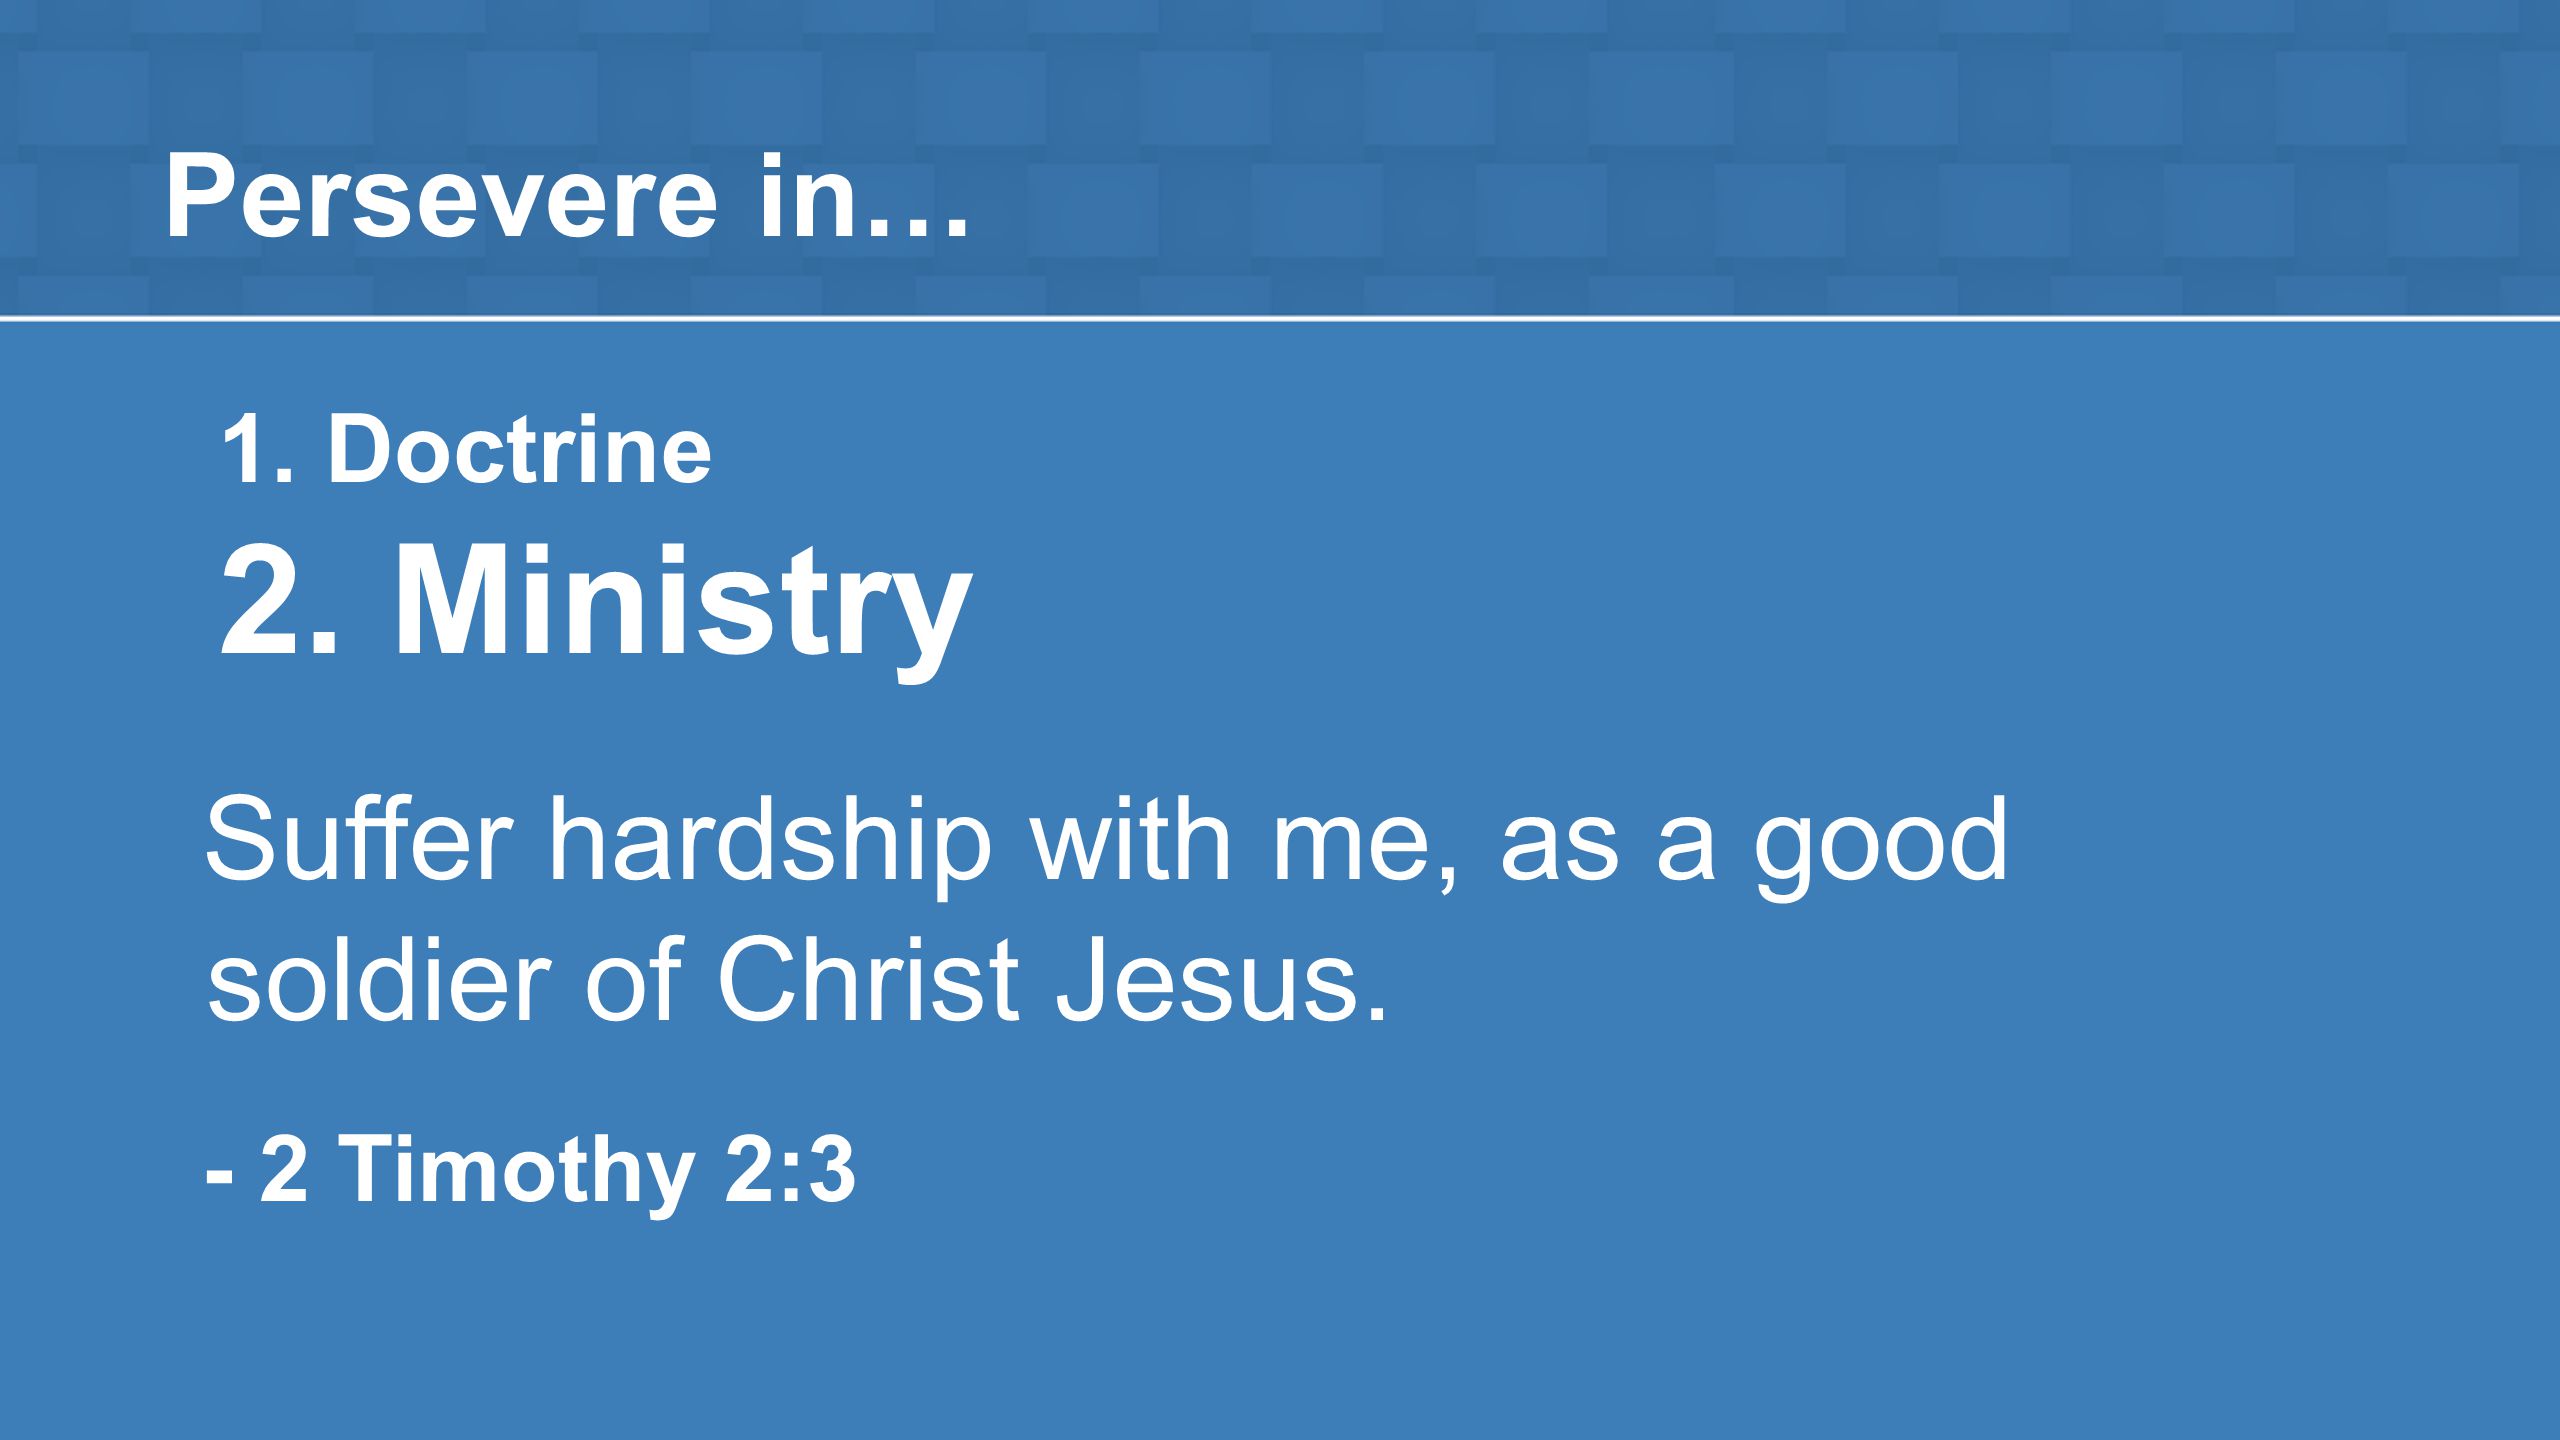 Persevere in… 1. Doctrine 2. Ministry Suffer hardship with me, as a good soldier of Christ Jesus.